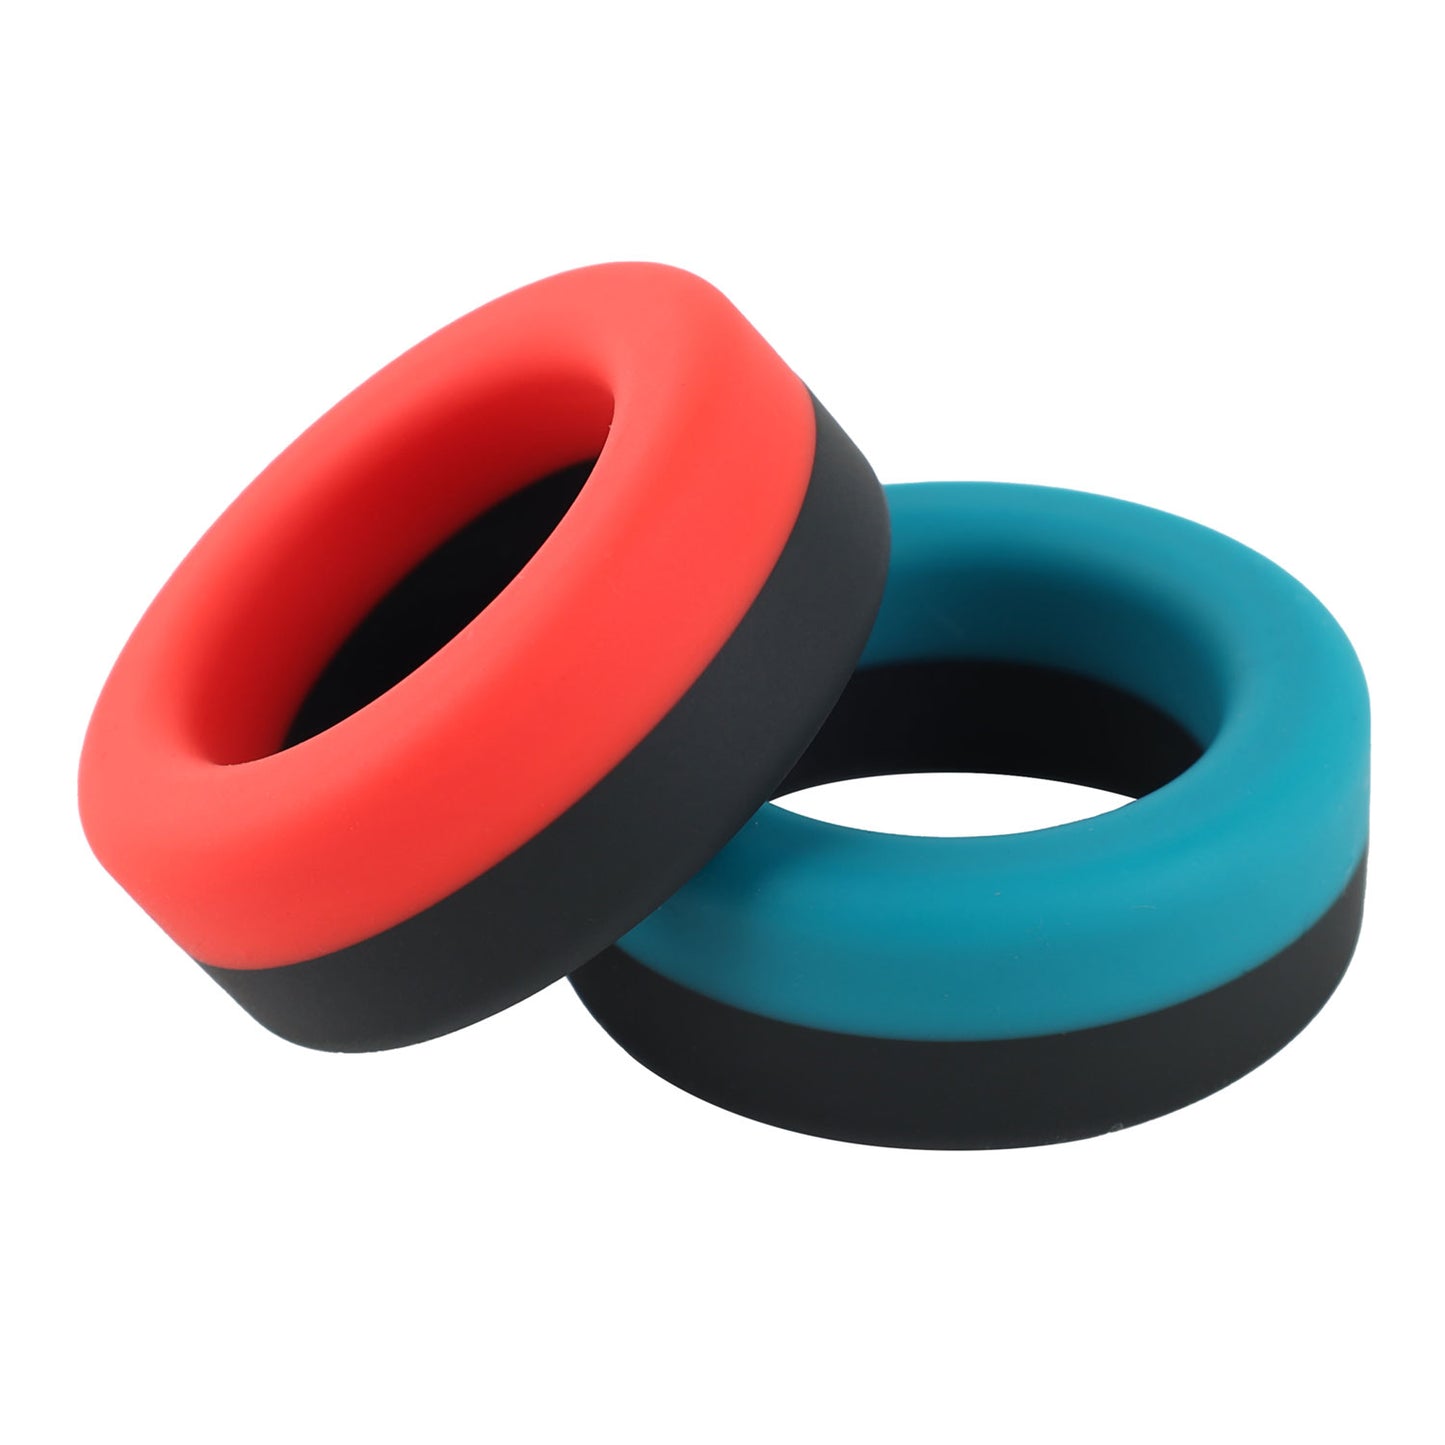 The Horny Company - John O Tyre Dual Colored Liquid Silicone Cock Ring Red/Black